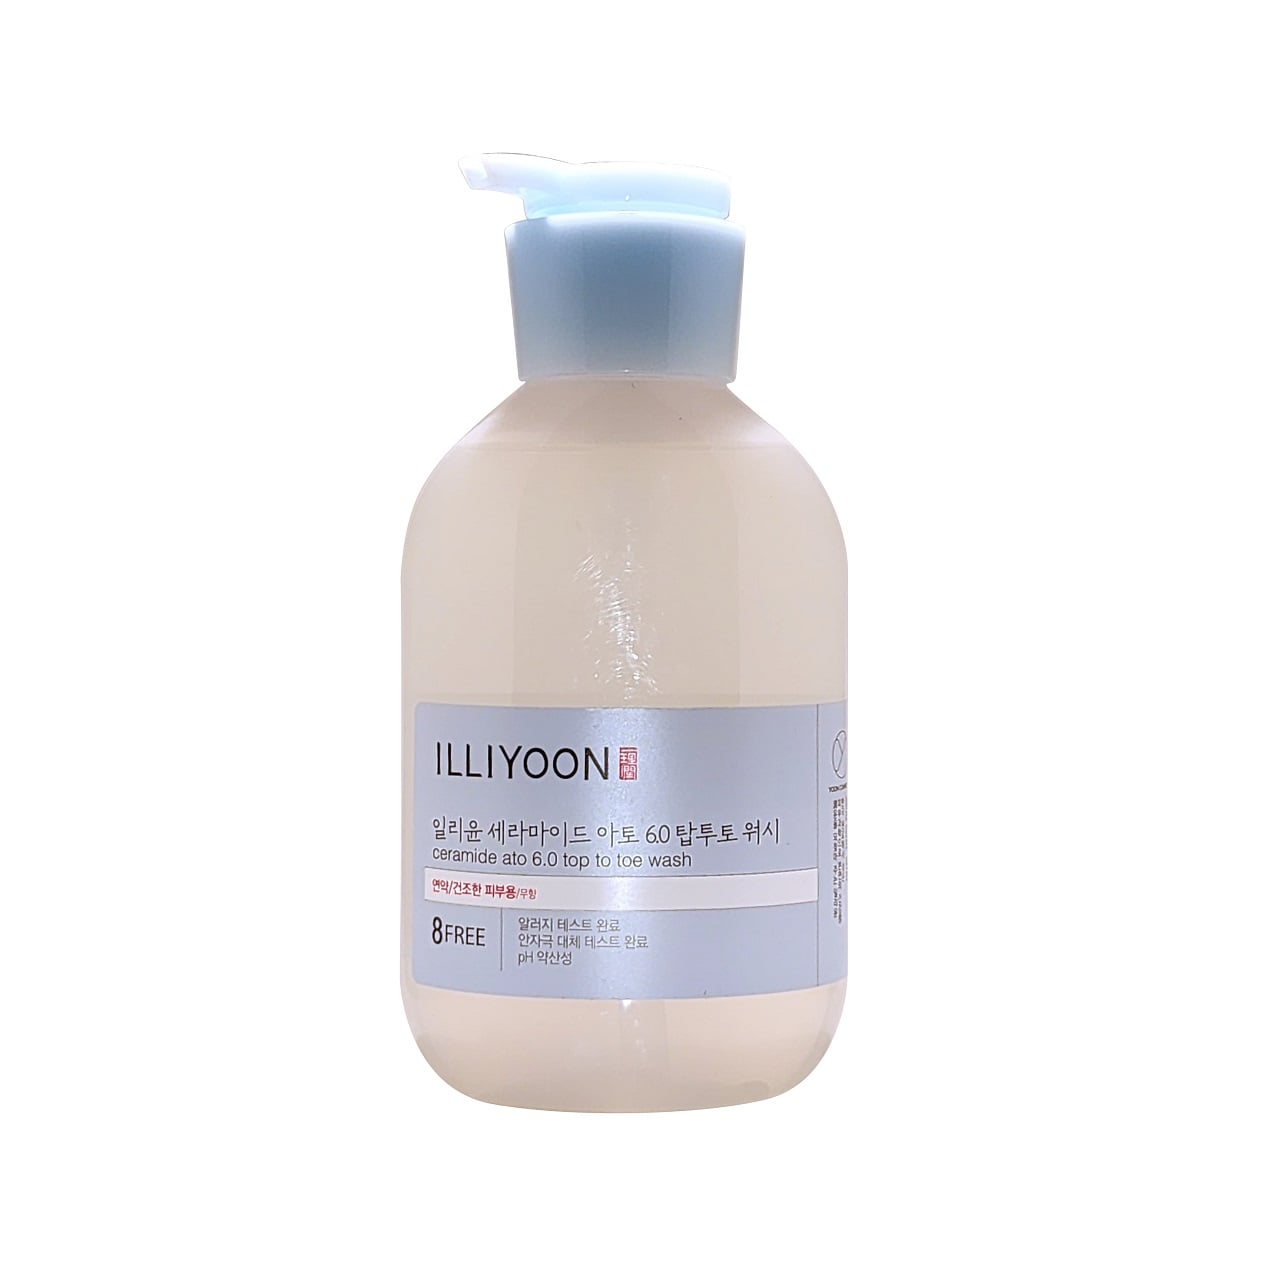 Product label for Illiyoon Ceramide Ato 6.0 Top to Toe Wash (500 mL)